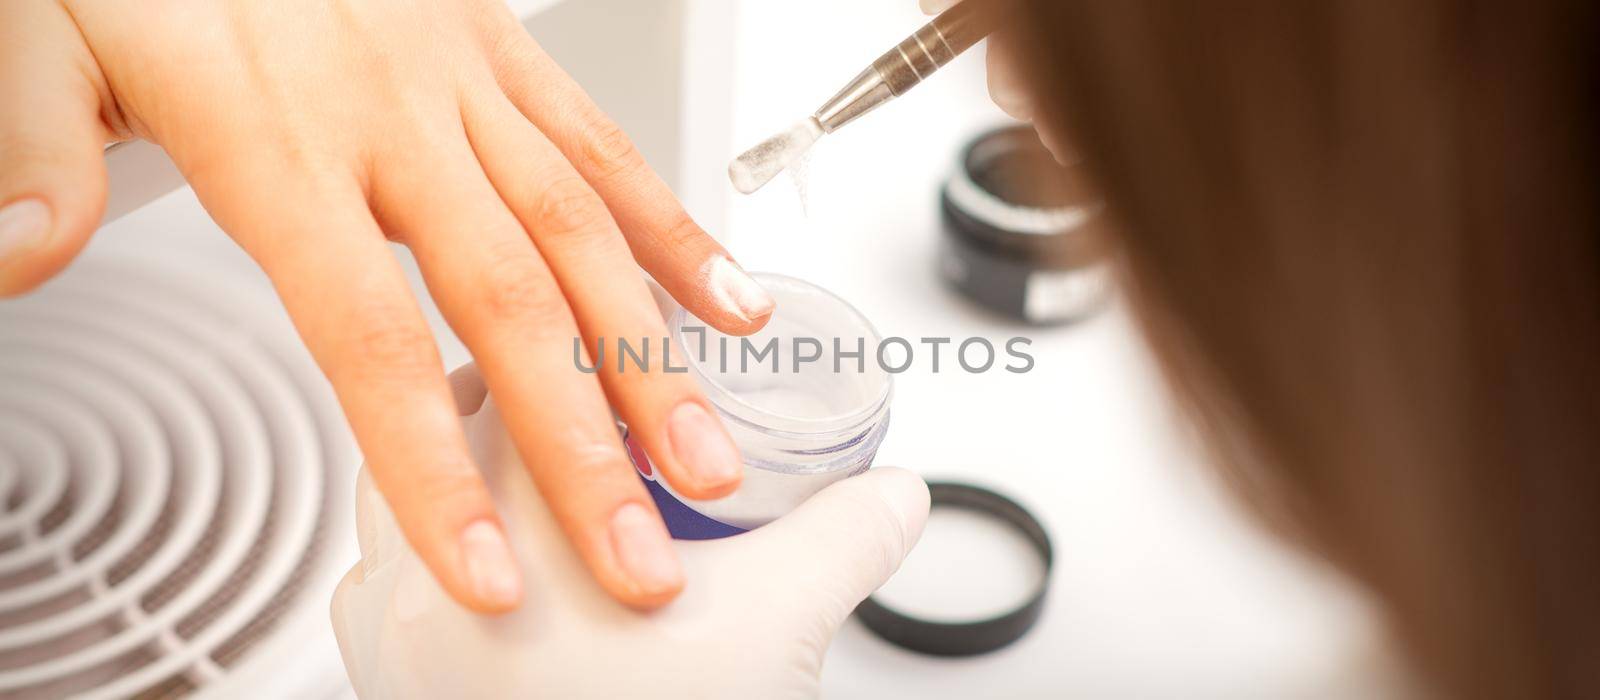 Manicure master applying acrylic powder on the female nails in a beauty salon. Strengthening of nails acrylic powder